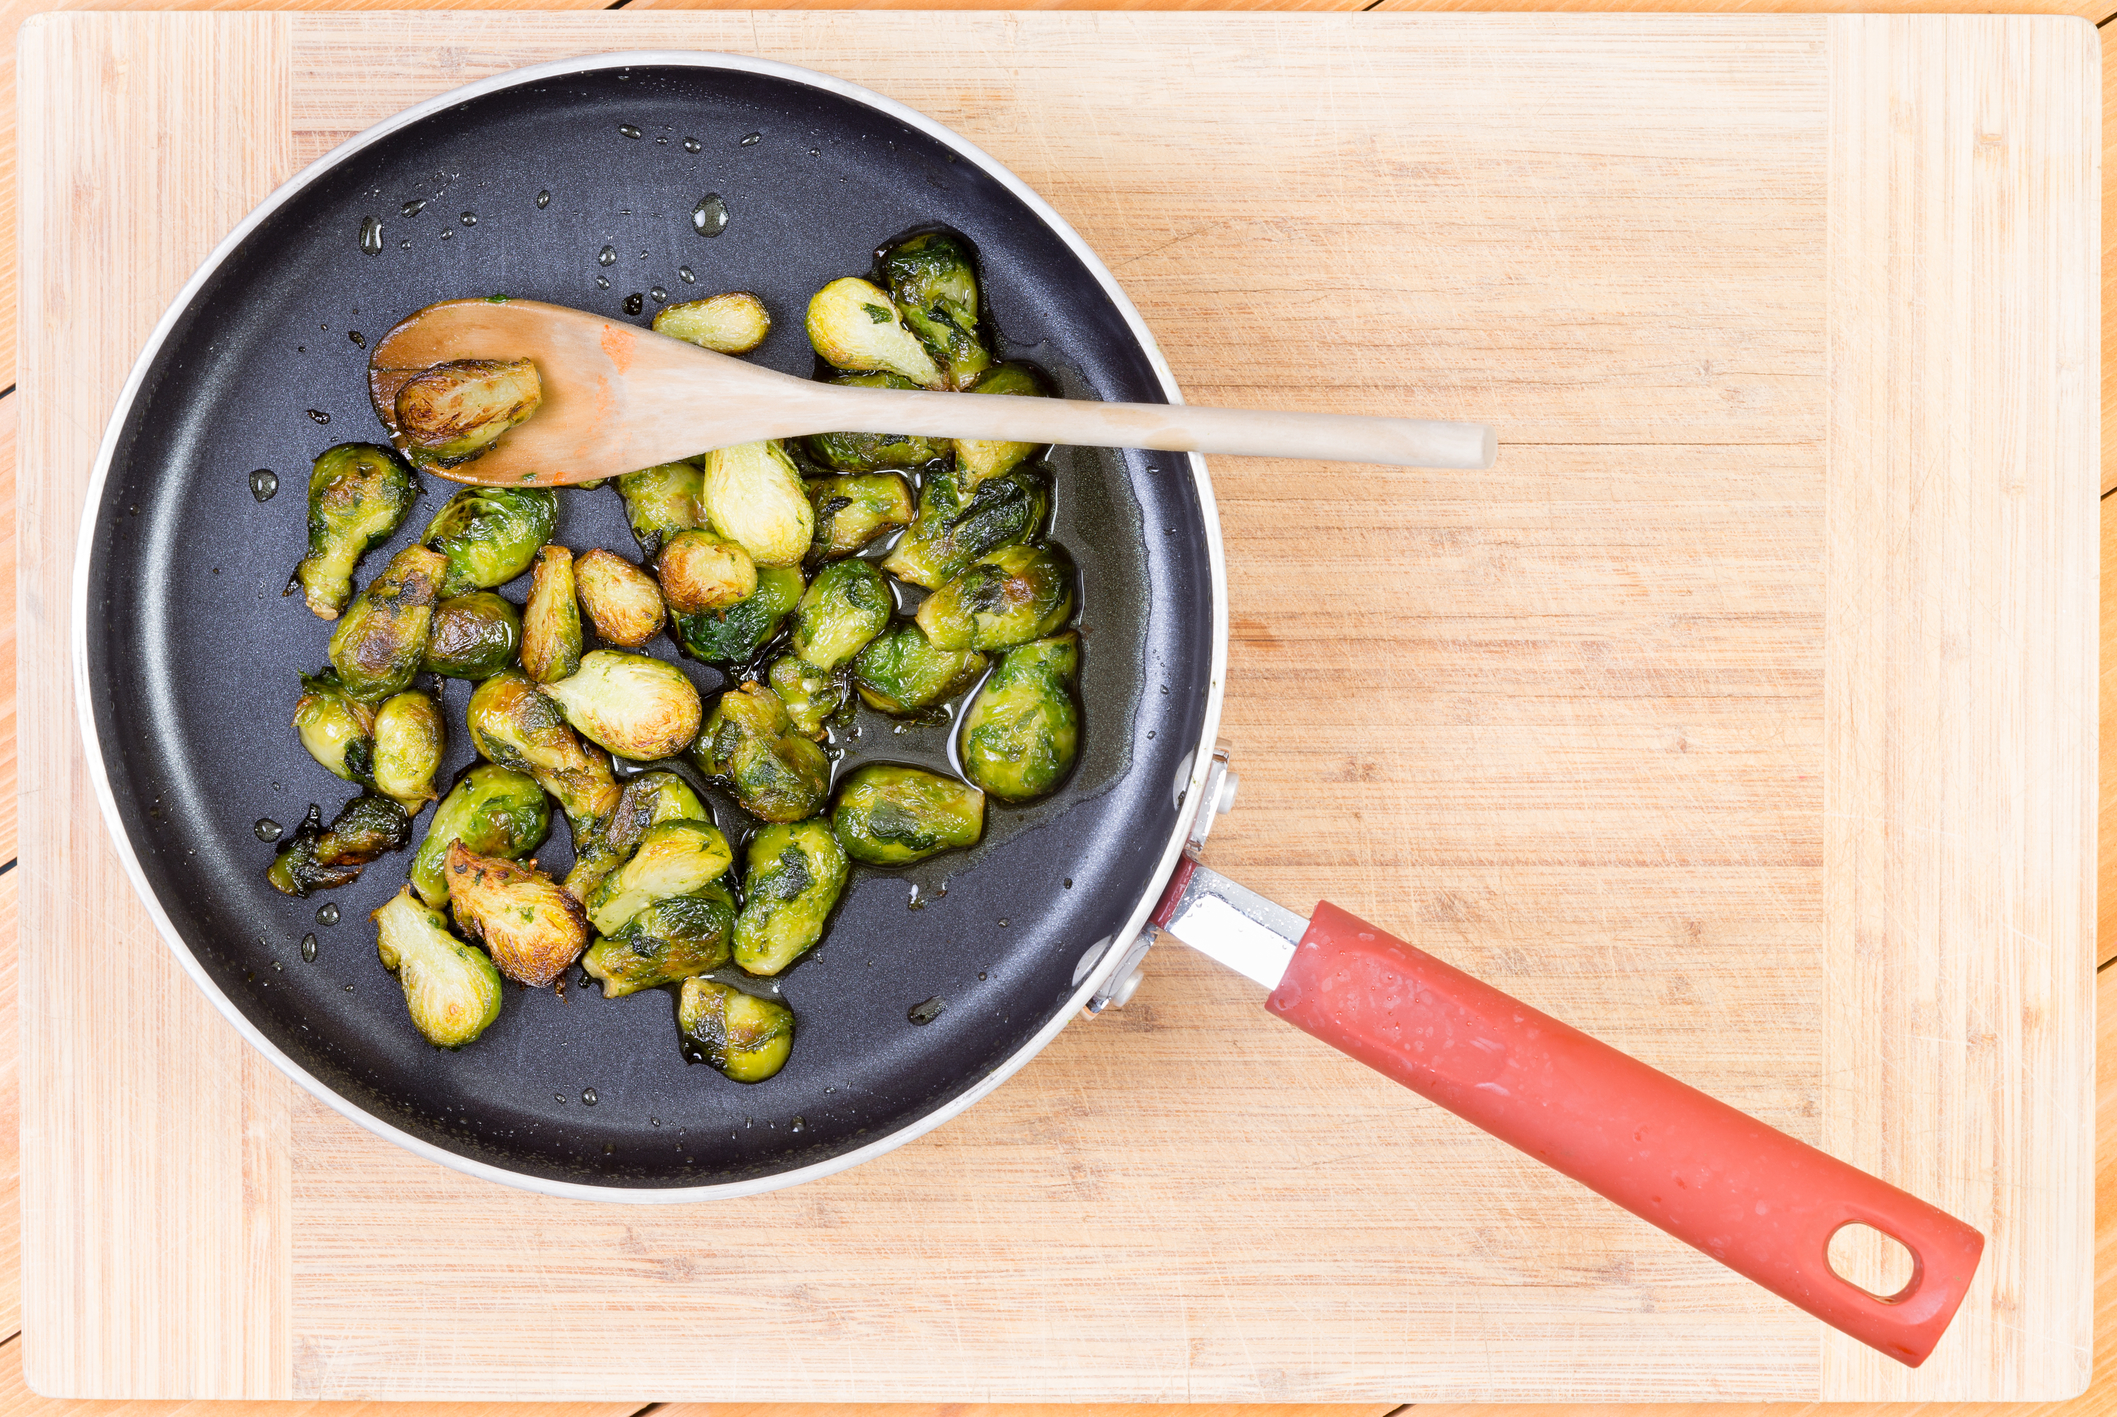 Brussel sprouts cooked in non-stick pan